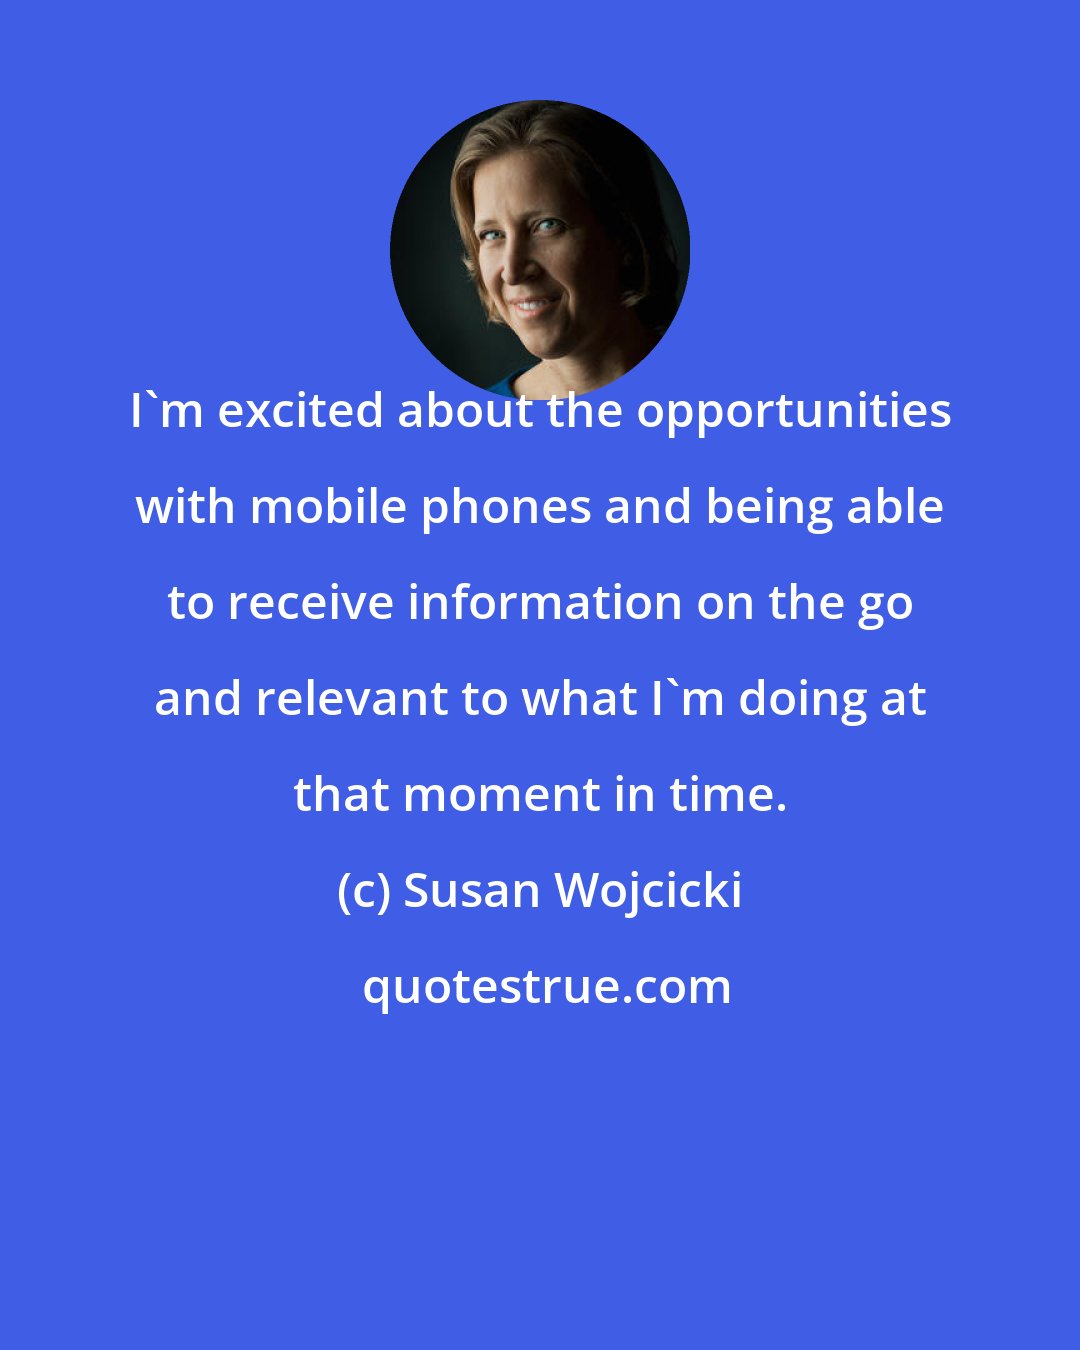 Susan Wojcicki: I'm excited about the opportunities with mobile phones and being able to receive information on the go and relevant to what I'm doing at that moment in time.